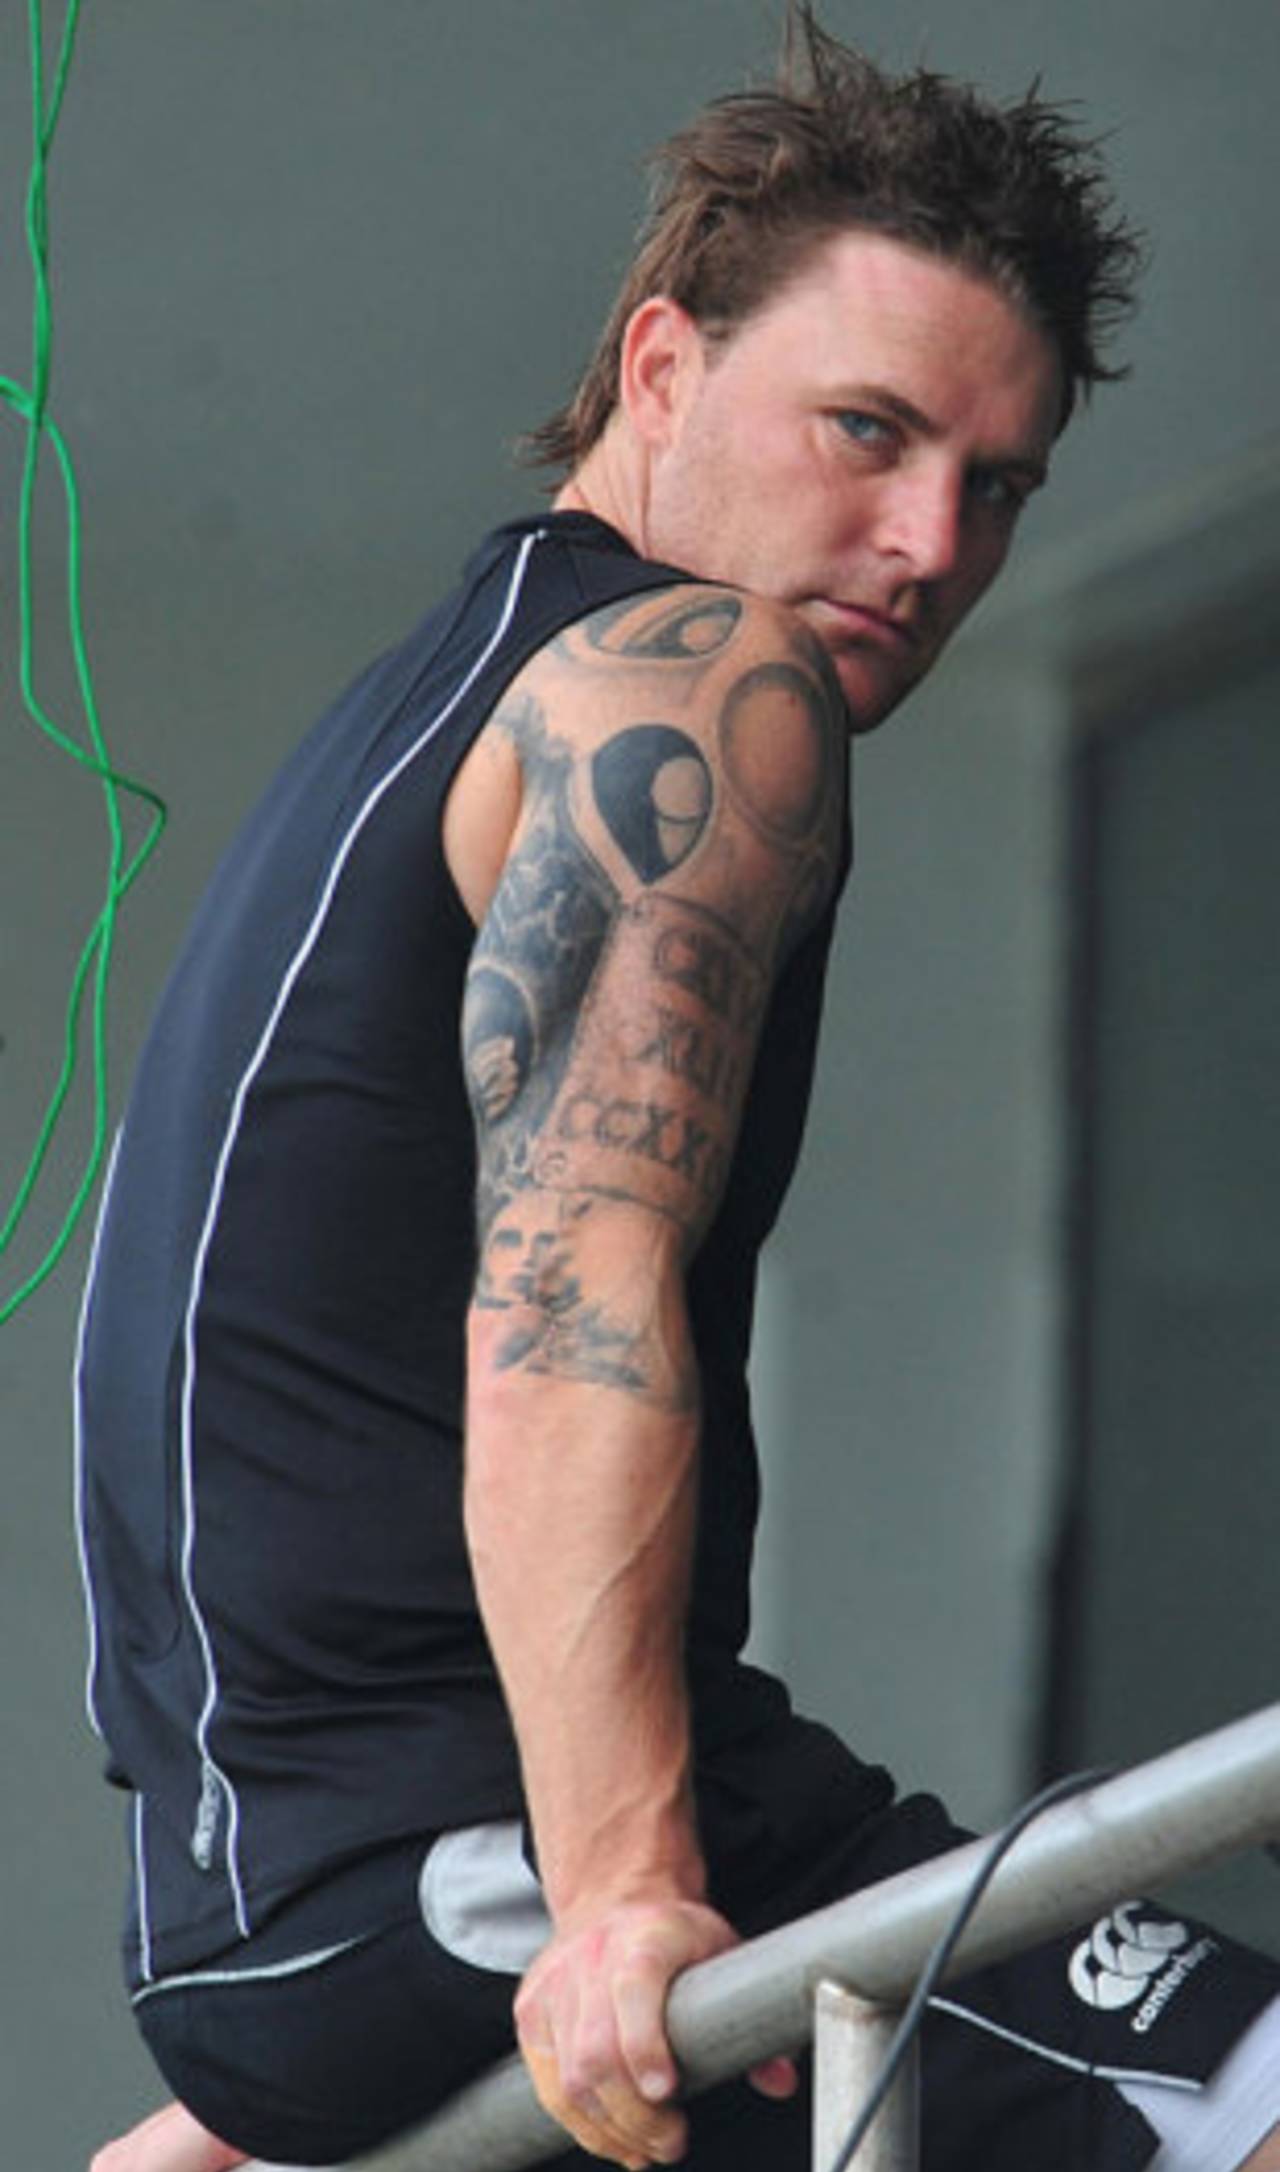 Brendon McCullum shows off his tattoo, Sri Lanka v New Zealand, 1st Test, Galle, 2nd day, August 19, 2009